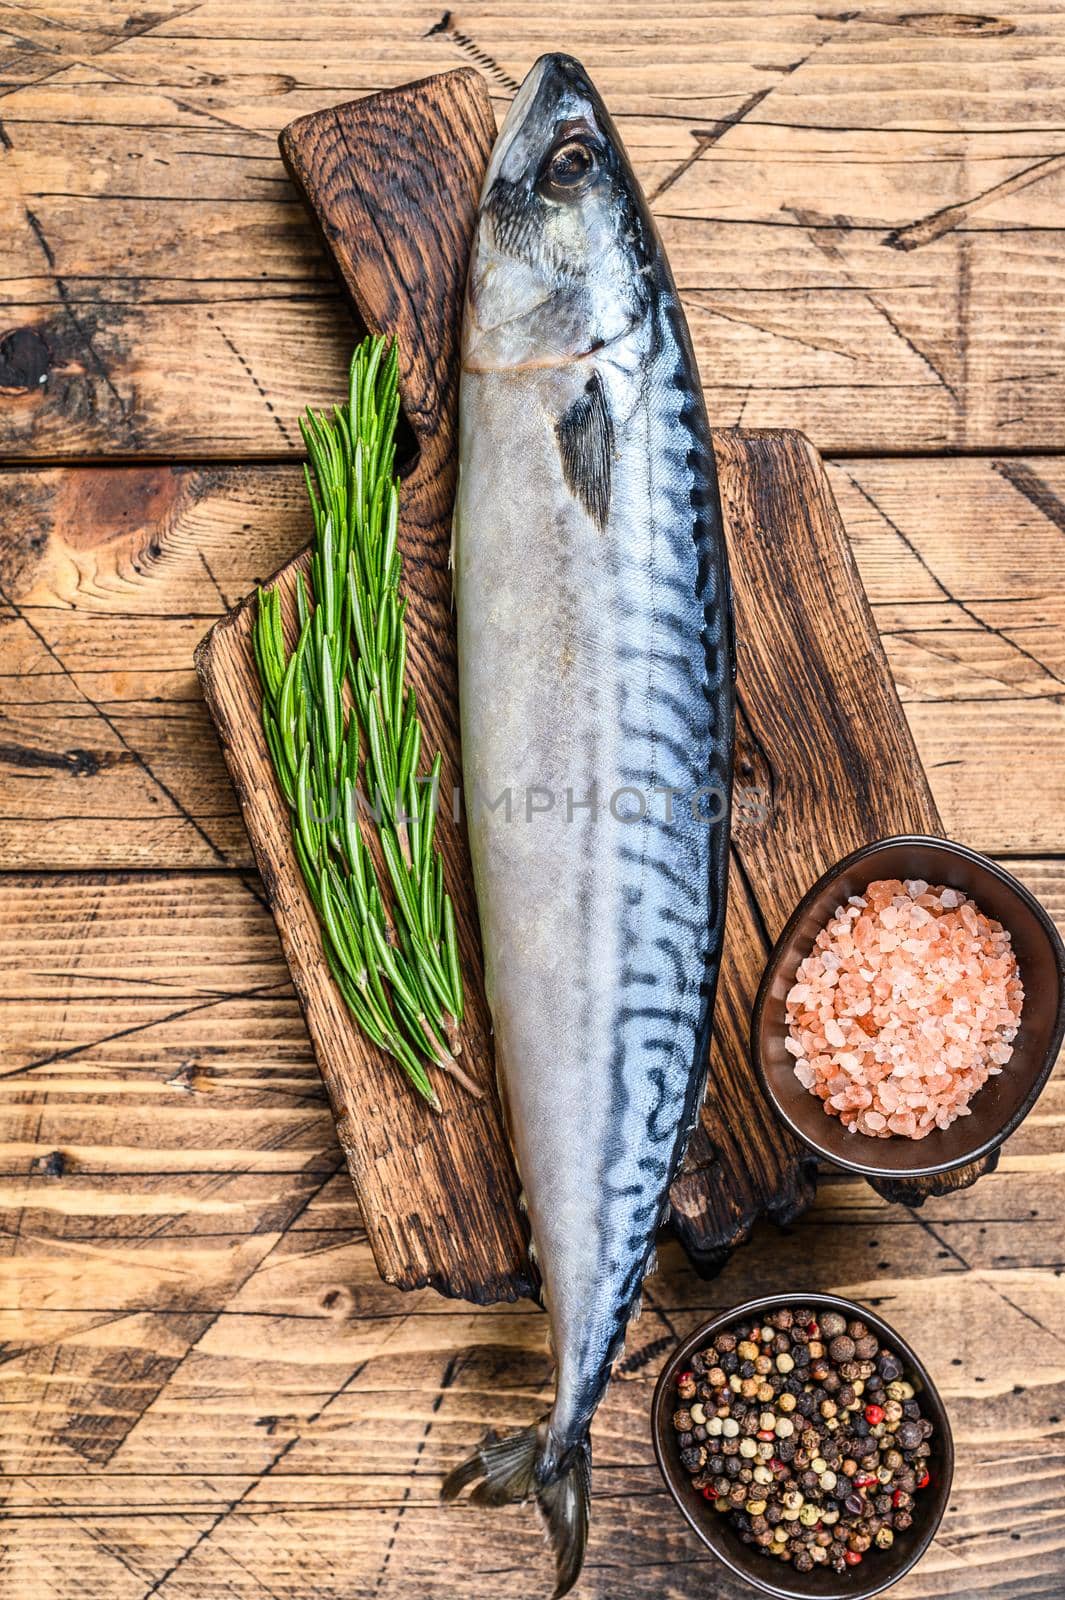 Raw saltwater fish Mackerel on a wooden cutting board with a thyme. wooden background. Top view by Composter